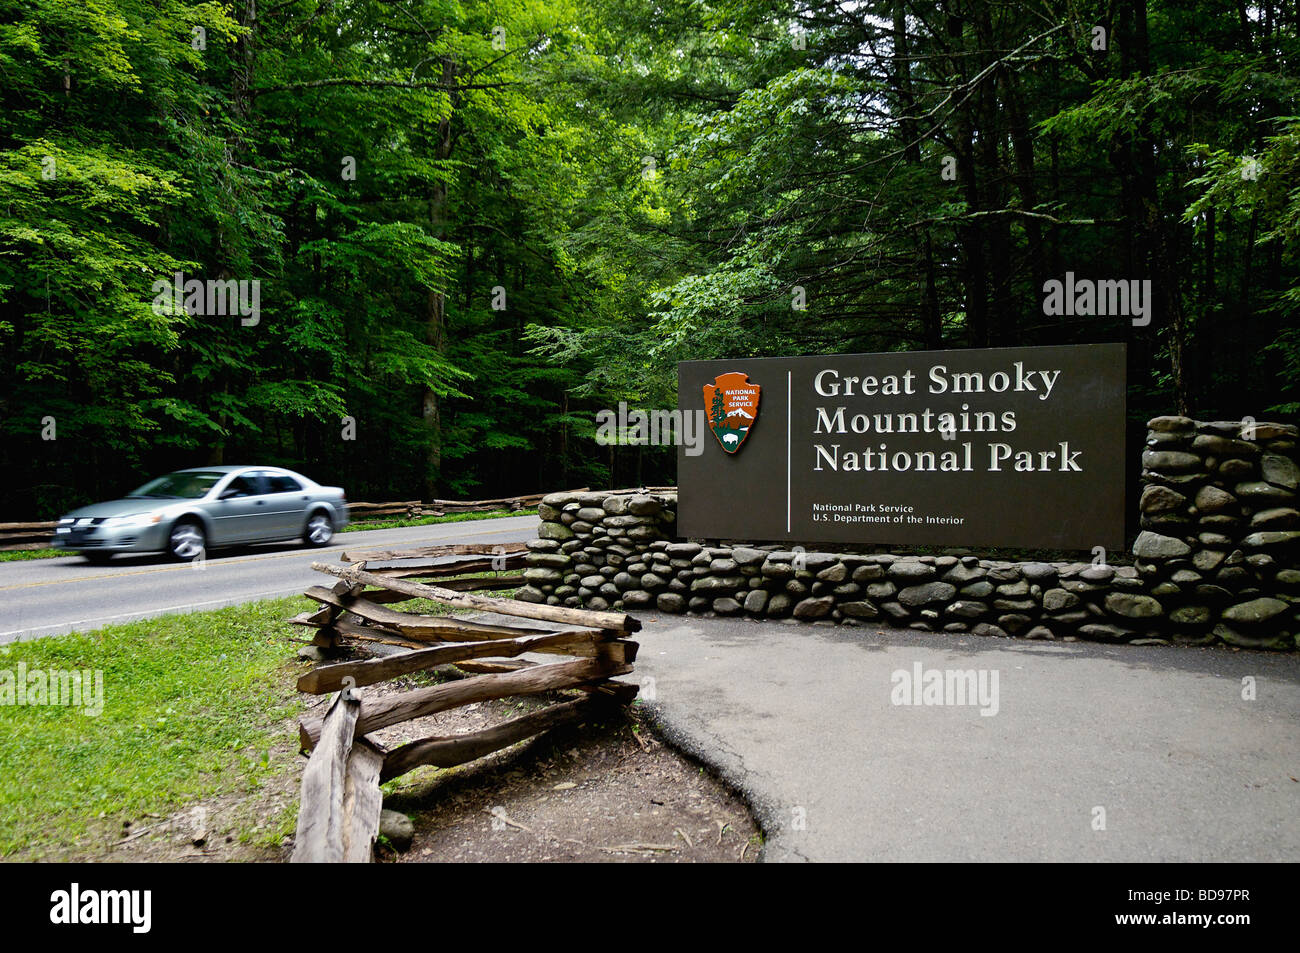 Car Driving Past the Entrance Sign to the Great Smoky Mountains National Park on Route 441 in Tennessee Stock Photo